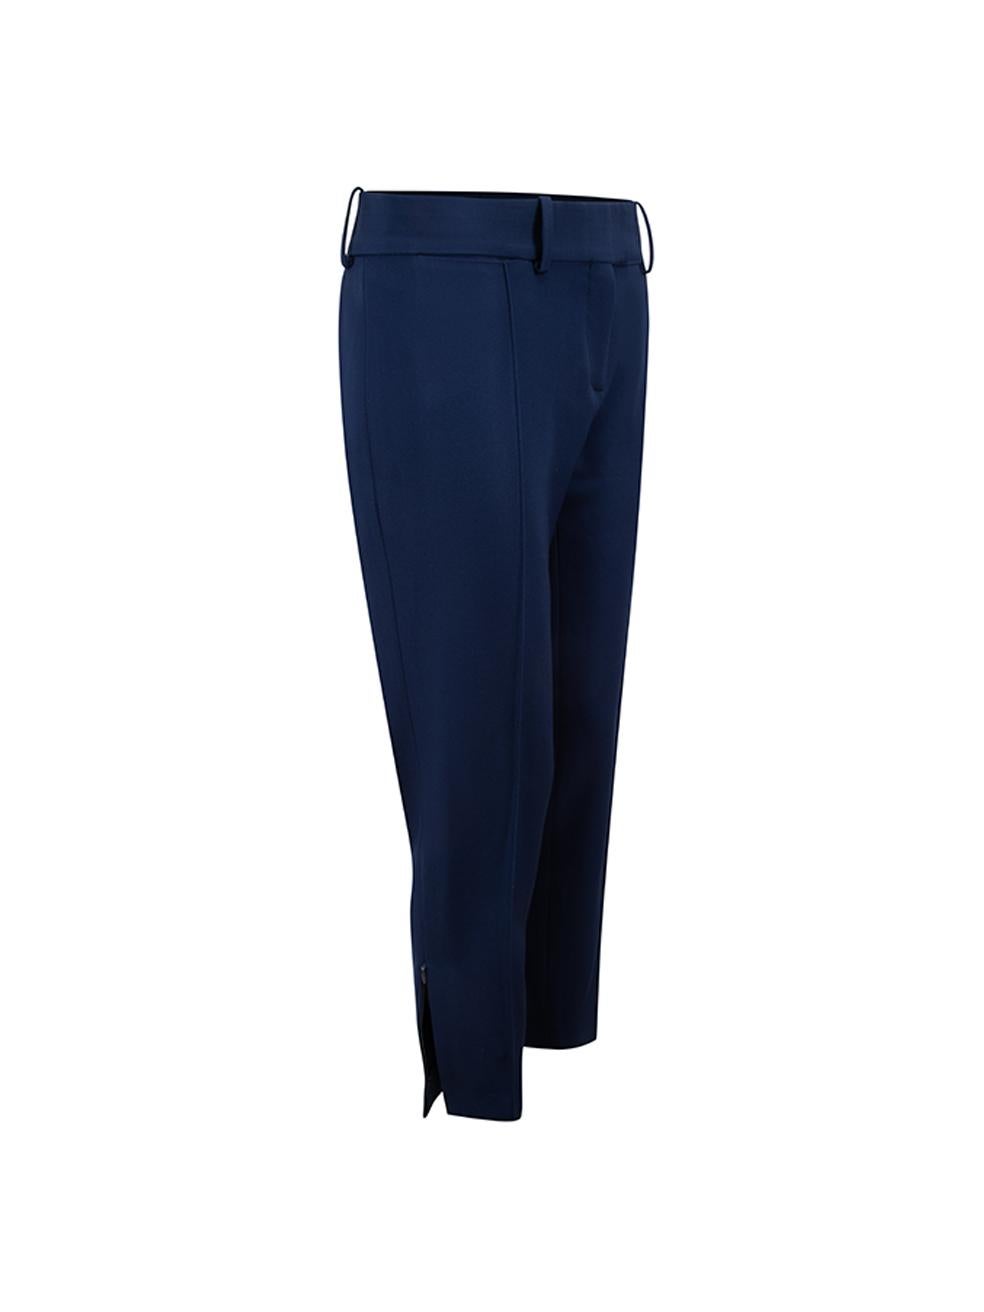 CONDITION is Very good. Hardly any visible wear to trousers is evident. There are loose threads to the interior and one of the belt loops. Theres a little wear to the side zips on this used Céline designer resale item. Details Navy Wool Straight leg